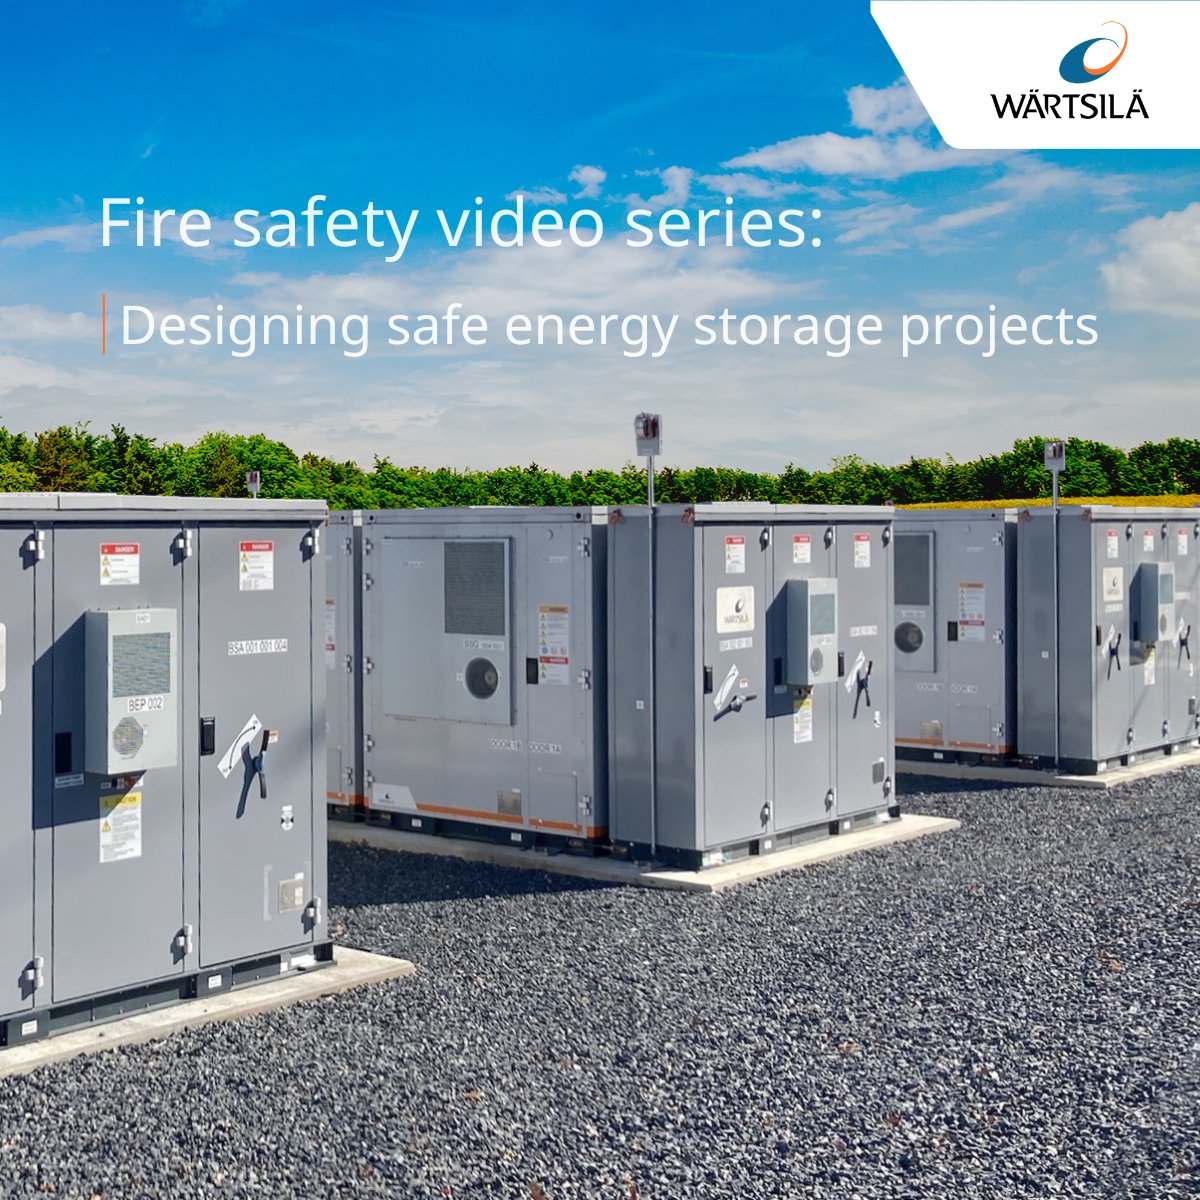 Check out our brand new video series on #FireSafety!🔋 In the first episode, you'll learn how to ensure #EnergyStorage projects are as safe as possible with our expert Mishaal SyedNaveed & Noah Ryder from Fire & Risk Alliance, LLC. ▶️youtube.com/watch?v=JZ_HxY… #BatterySafety